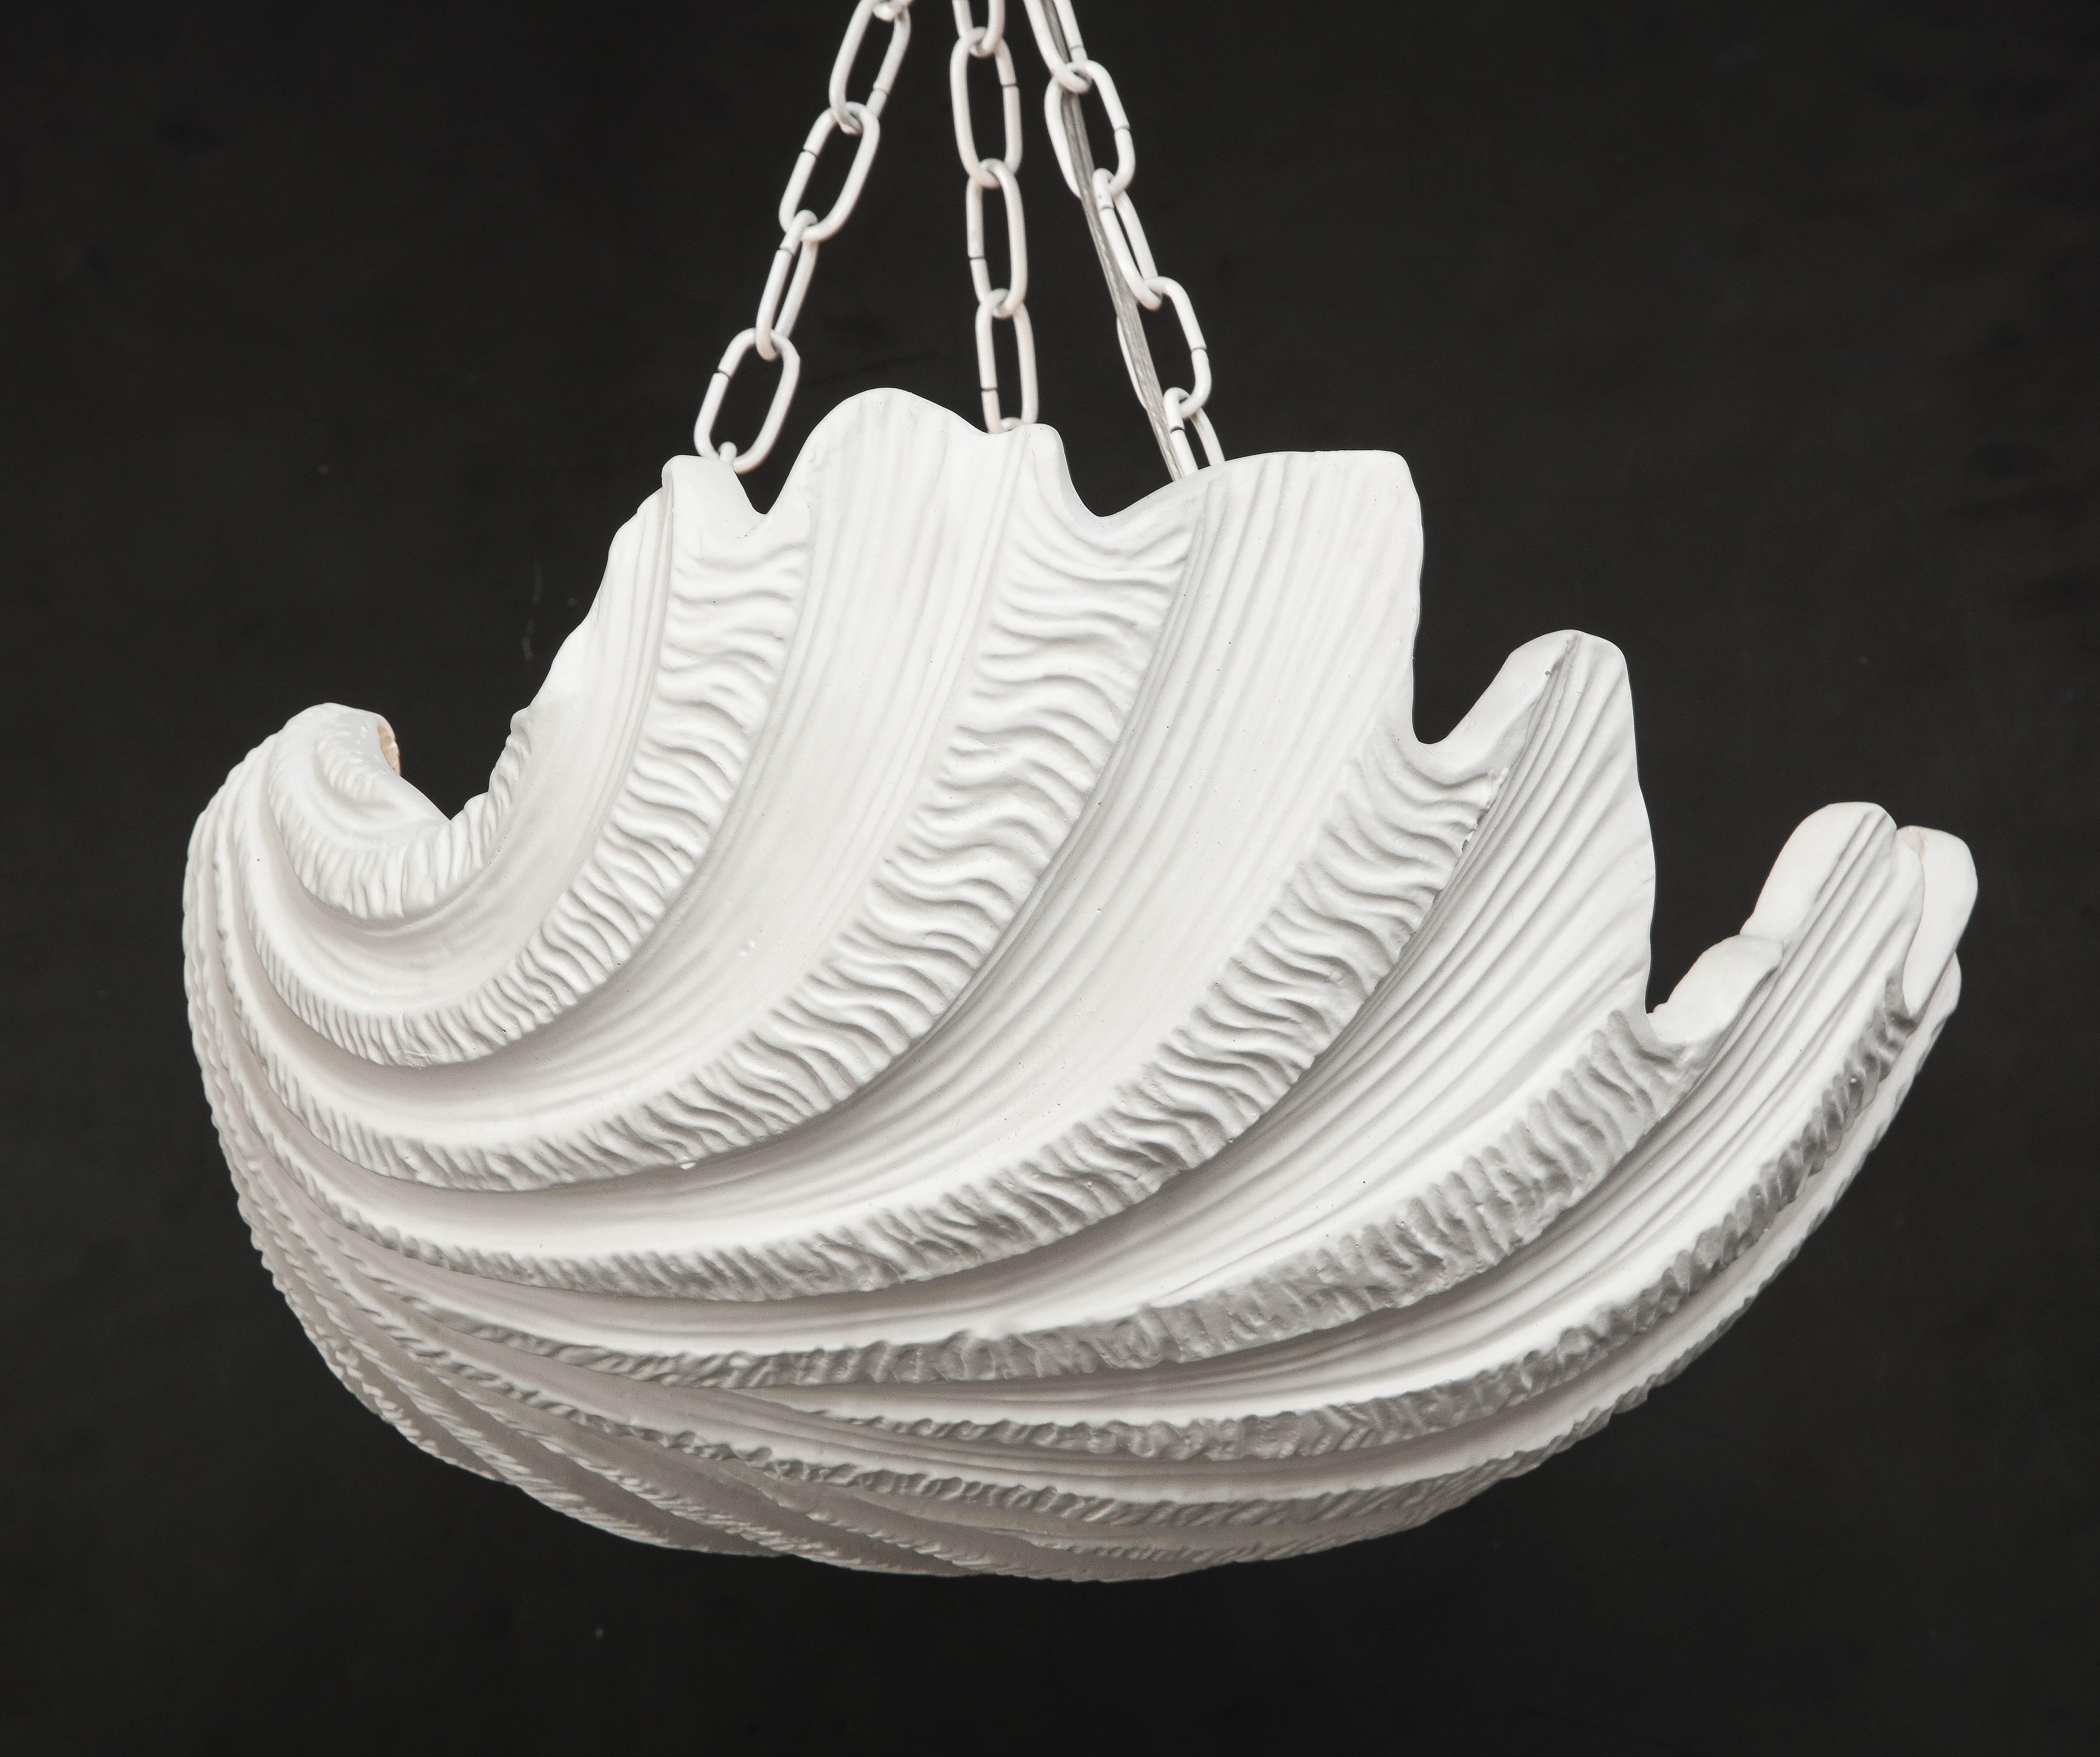 A striking asymmetrical scalloped chandelier in white fiberglass resin by Sirmos with scalloped edges and ribbed textures with three newly wired sockets for standard bulbs for the U.S. market and refinished painted surface attached to chain at three